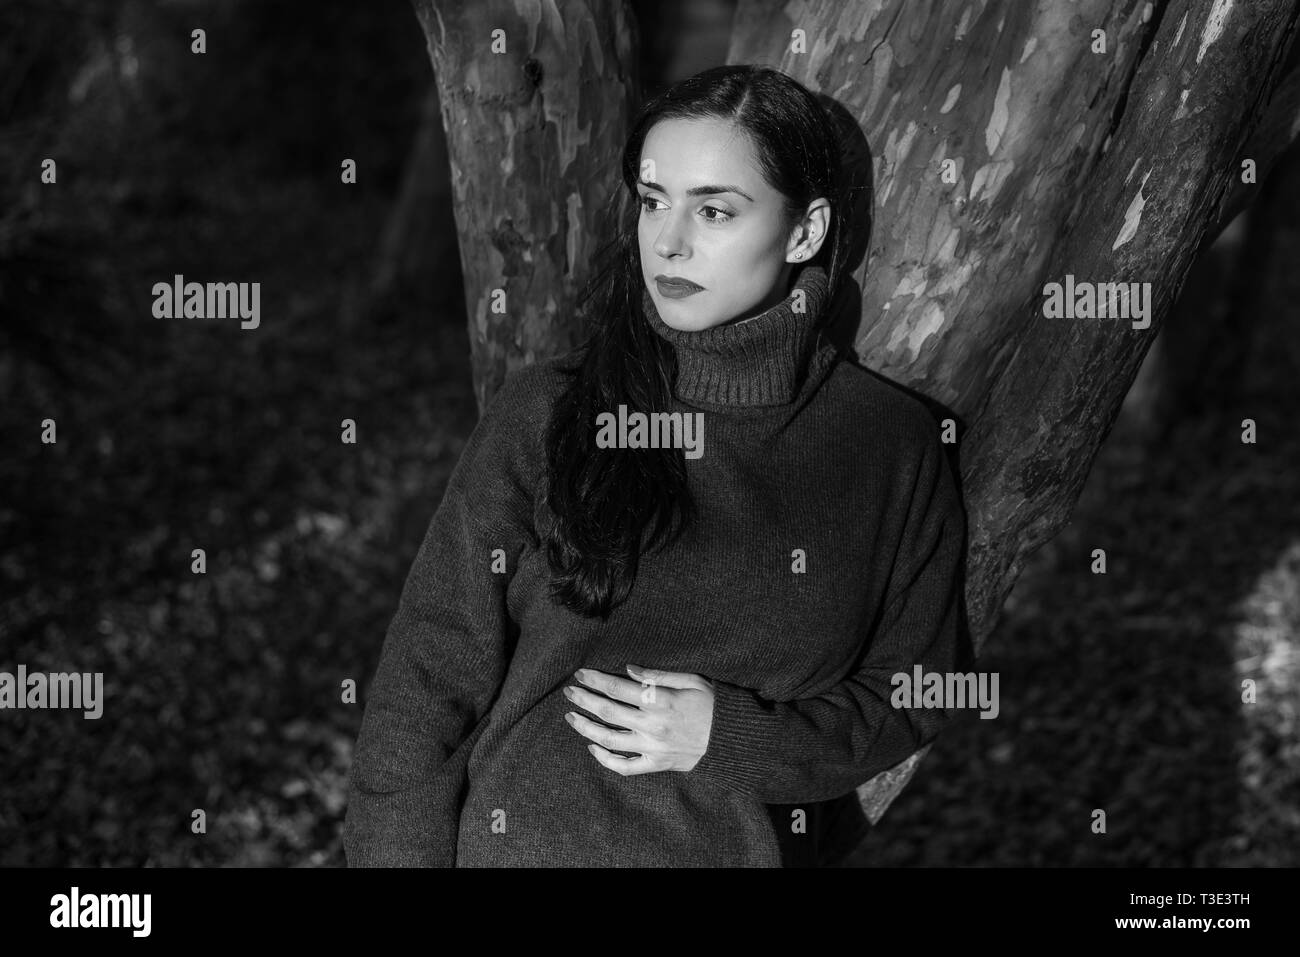 Outdoor Fashion Portrait Of A Black Haired Caucasian Woman Leaning